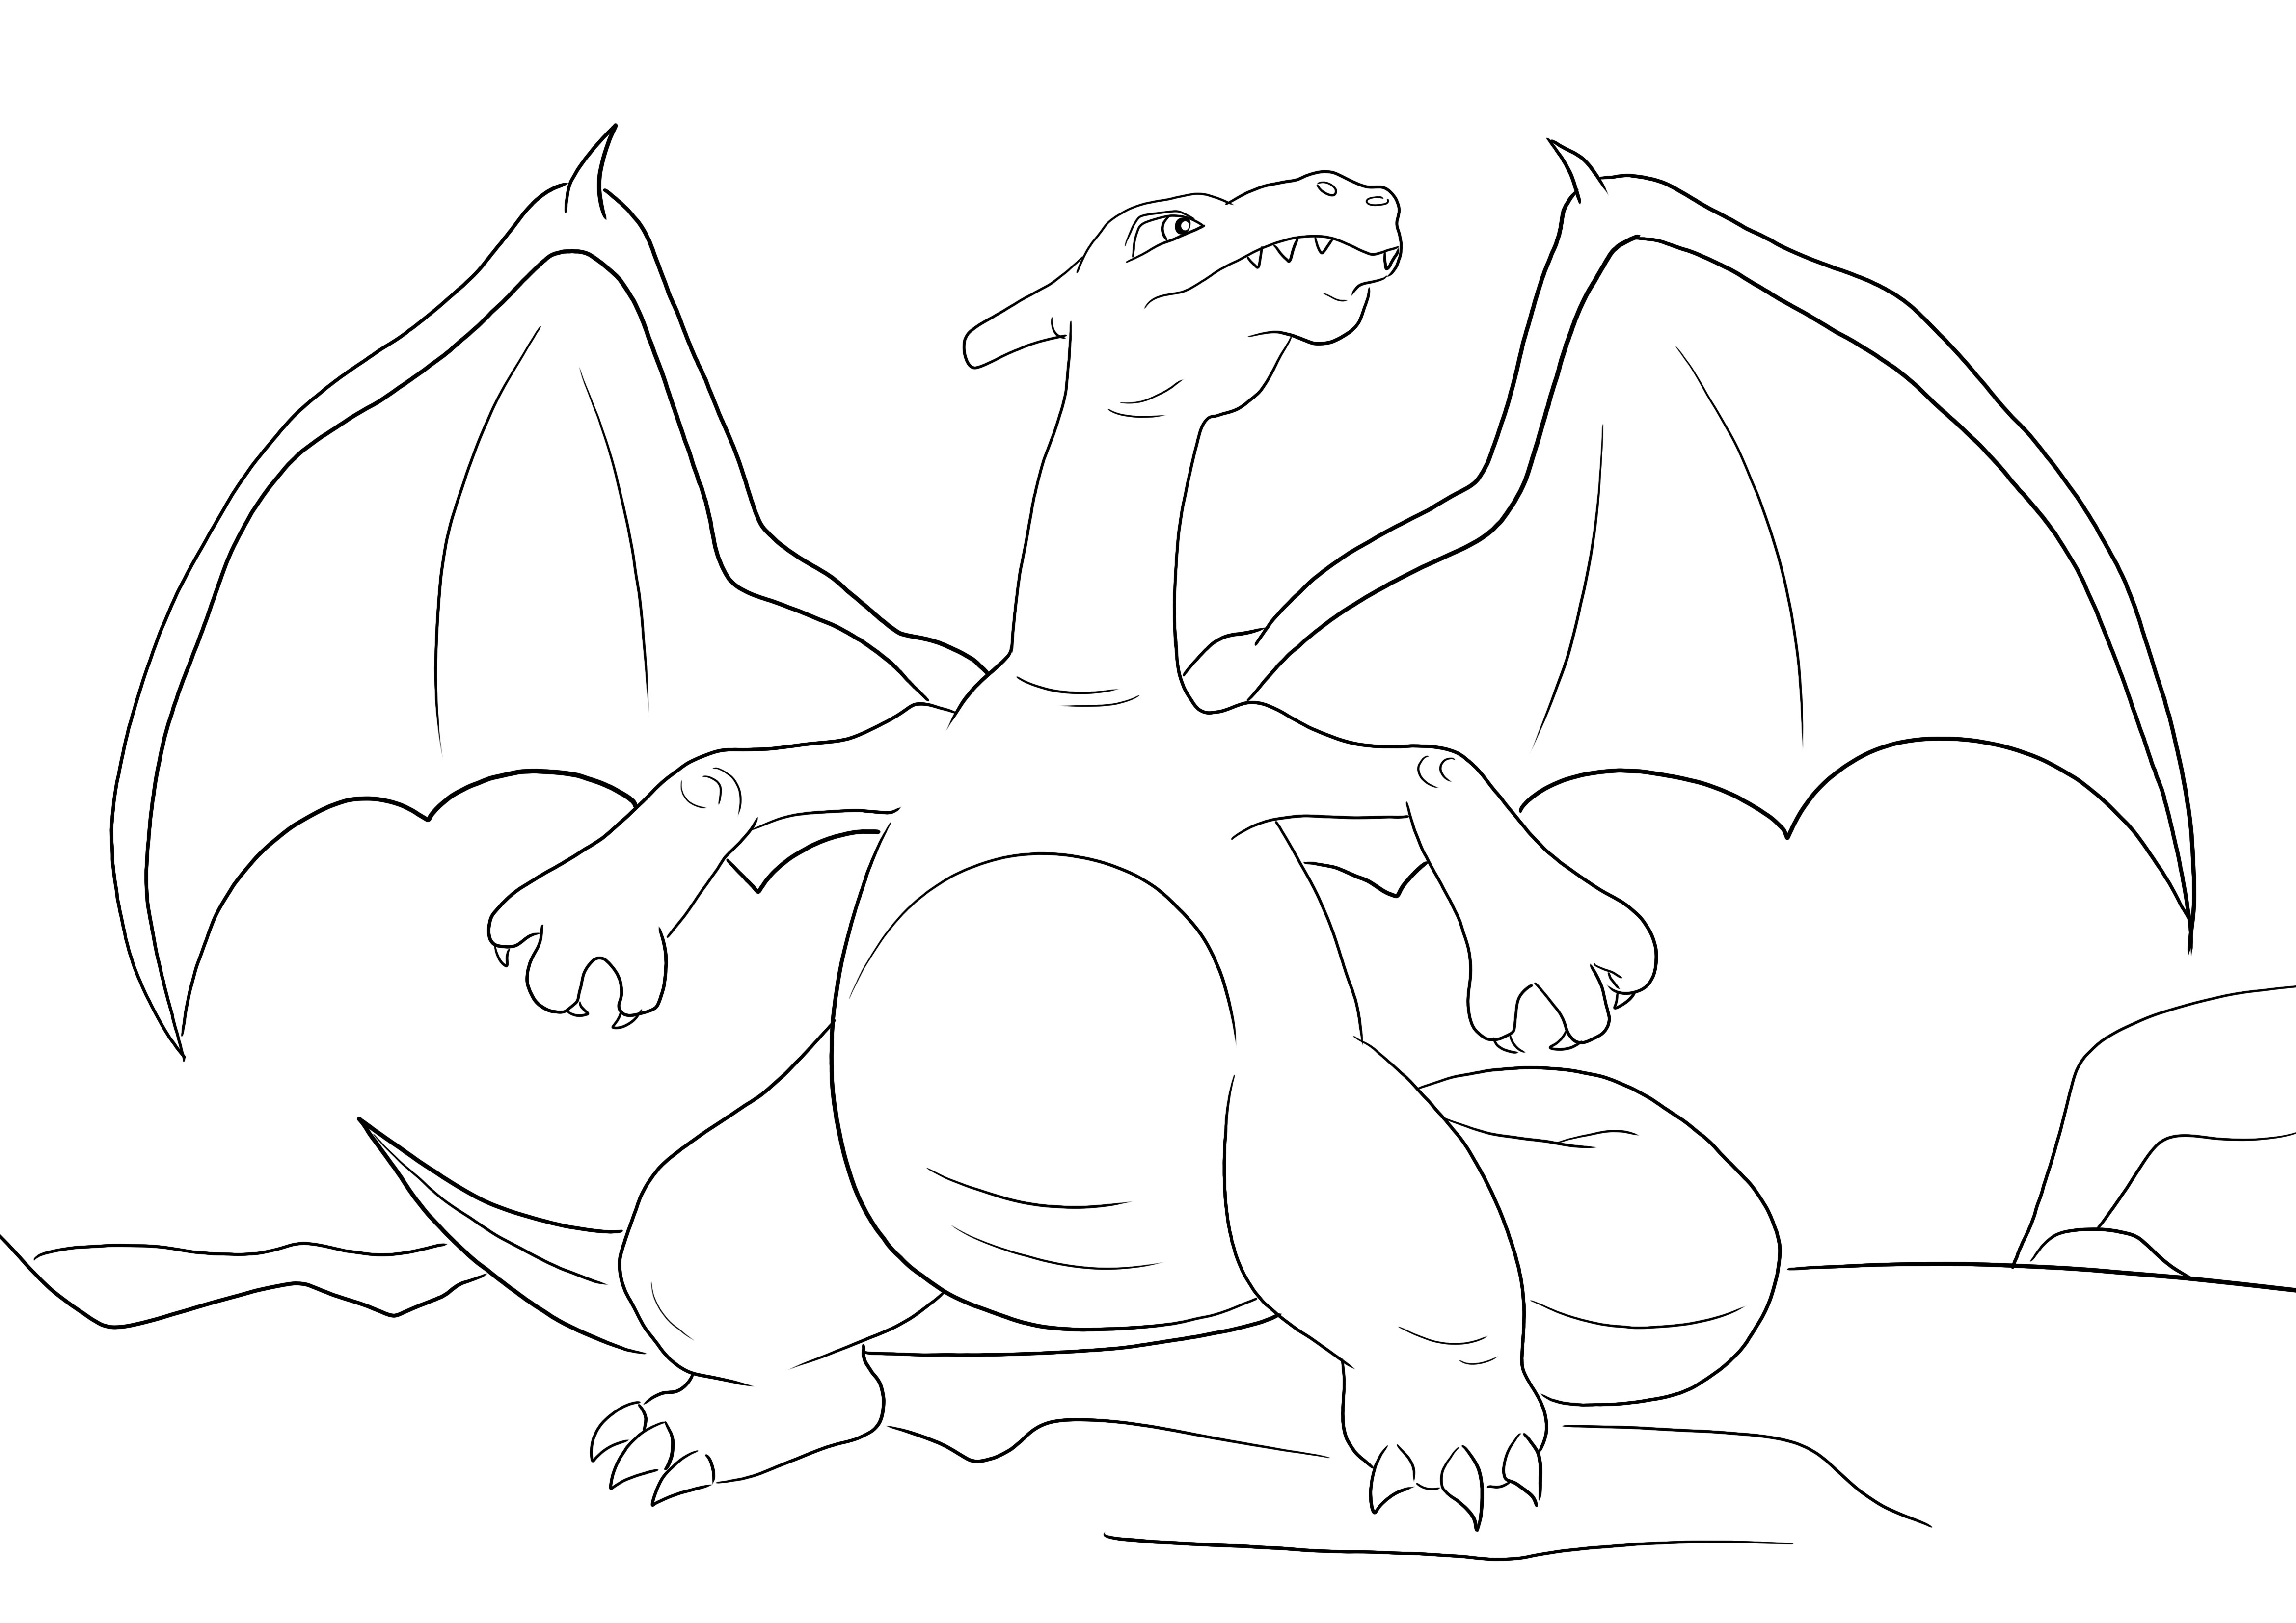 Charizard Pokemon downloading and free coloring page